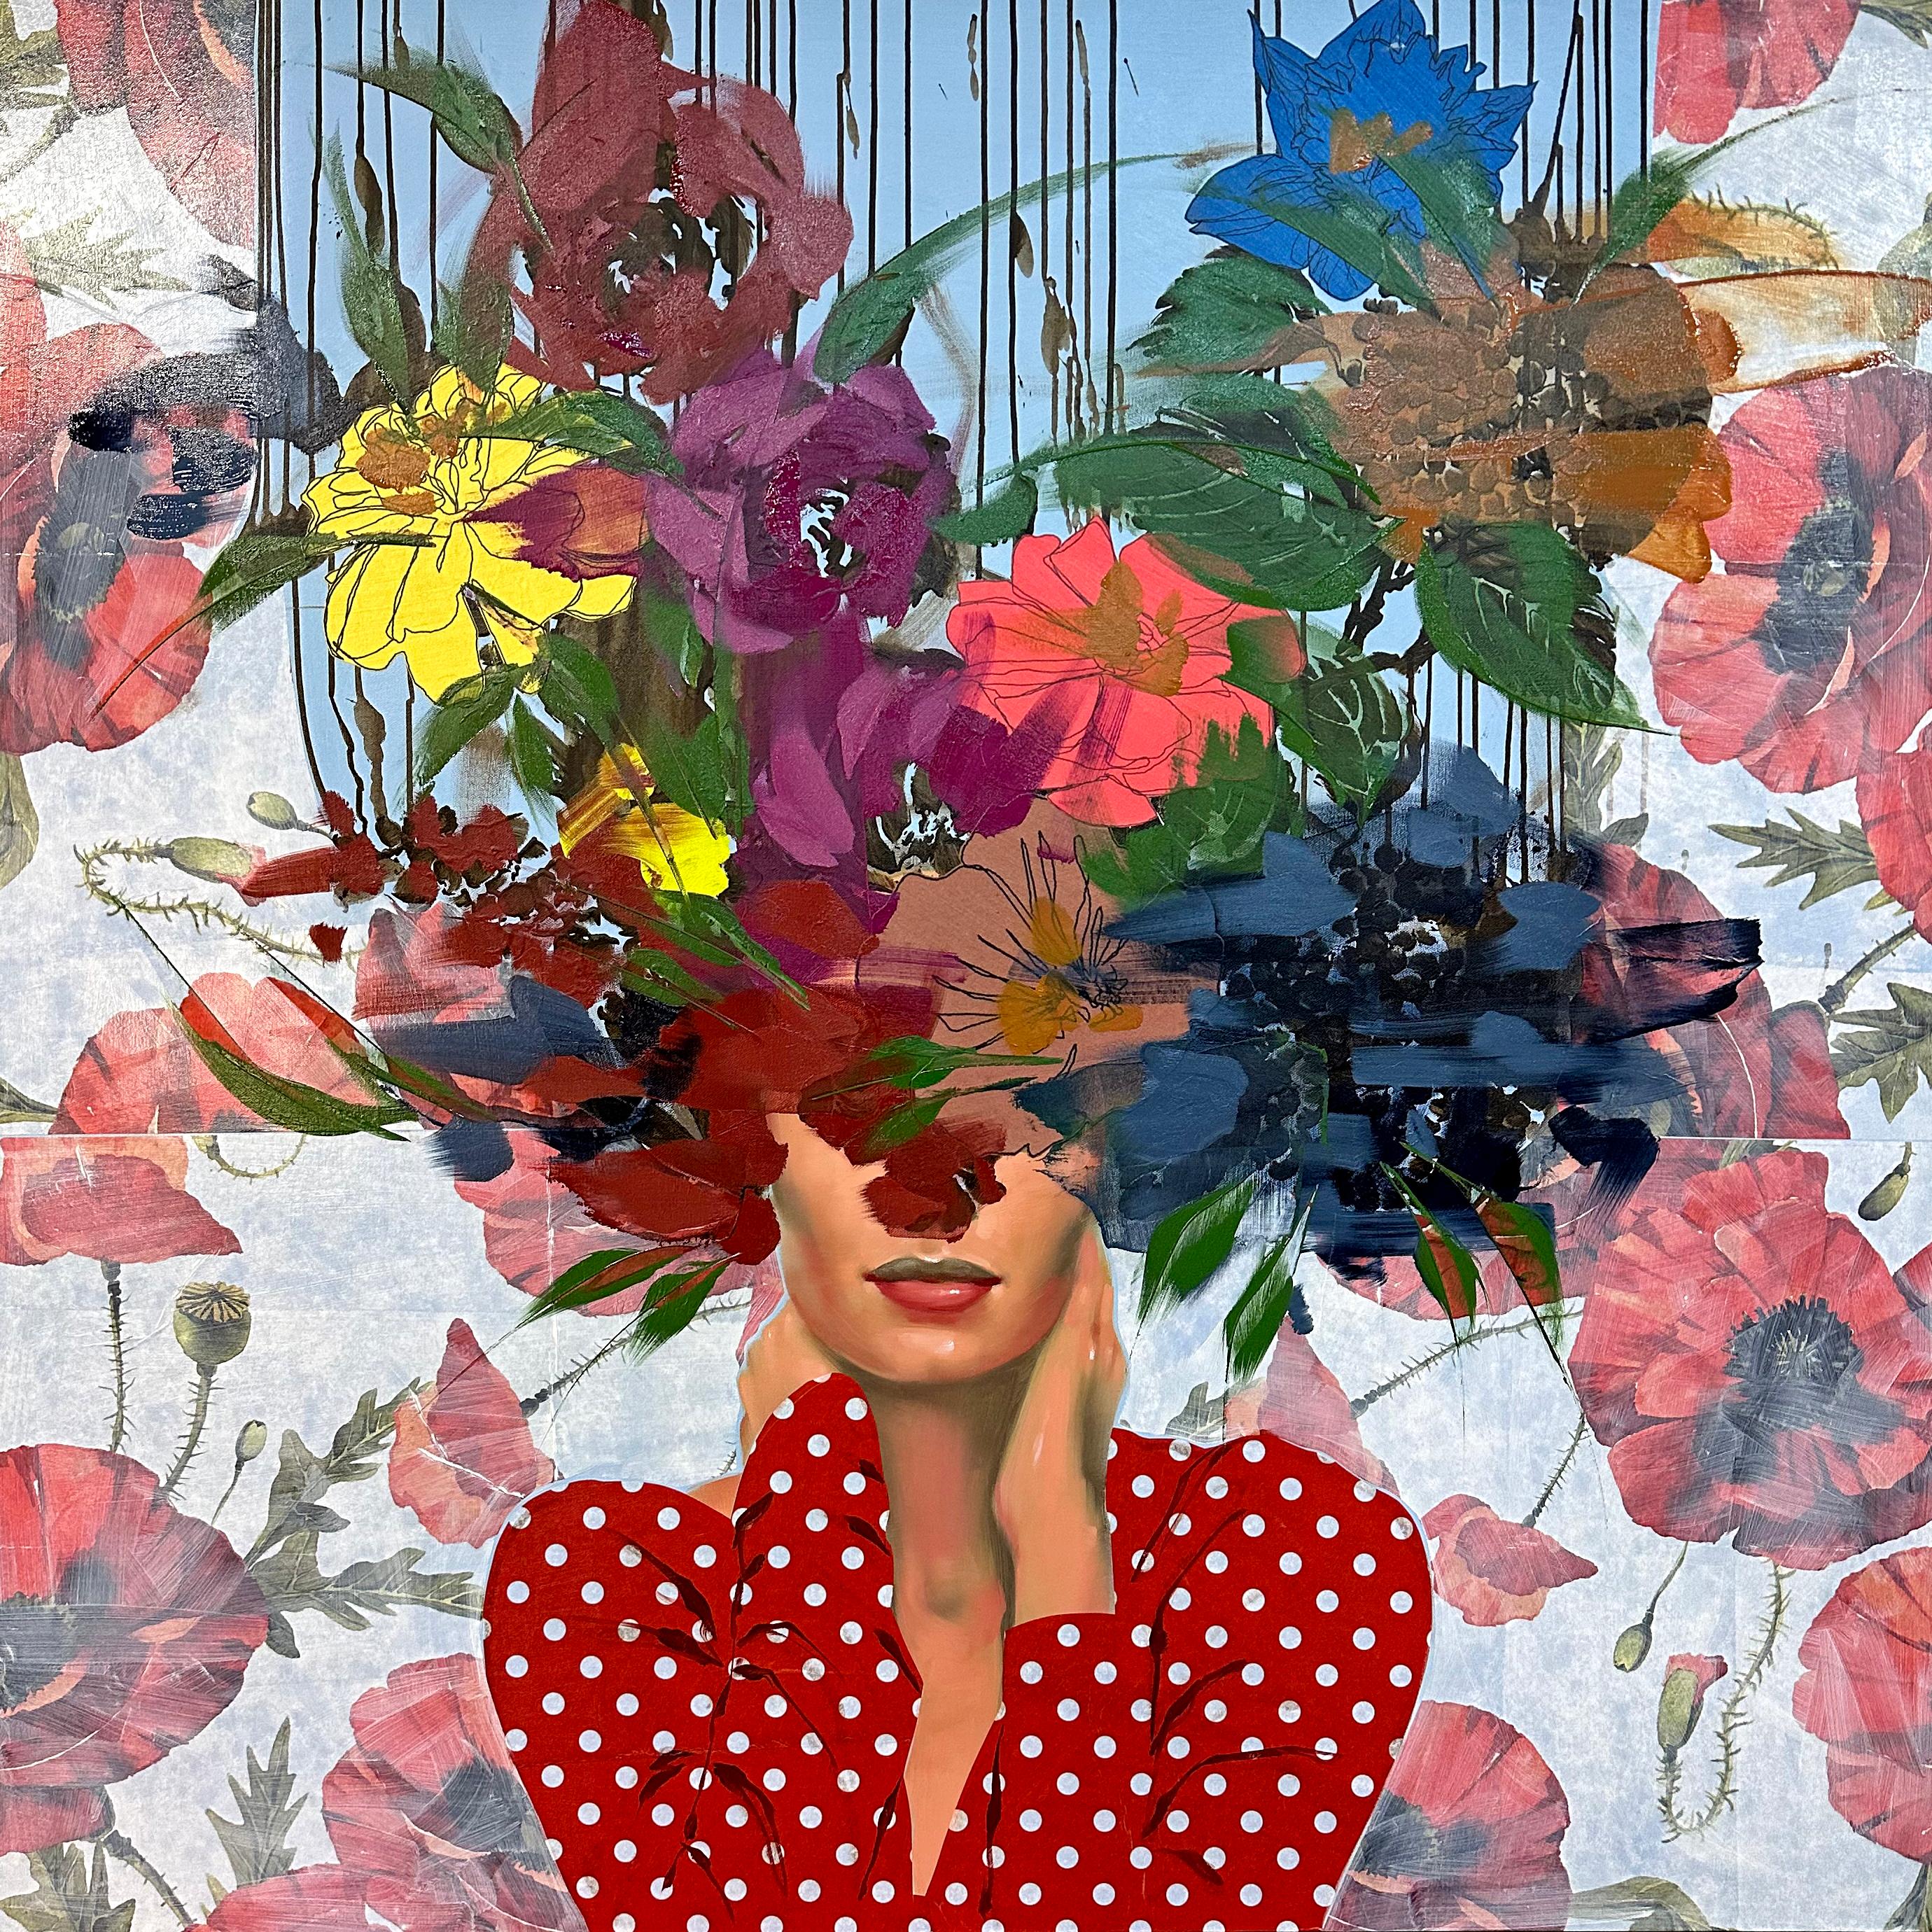 ANNA KINCAIDE
"Alive Again"
Oil & Mixed Media on Canvas
48 x 48 inches

Communicating emotion and narrative with limited assistance from her figure’s facial expressions, Anna Kincaide creates cascades of flowers that cover her subjects to explore